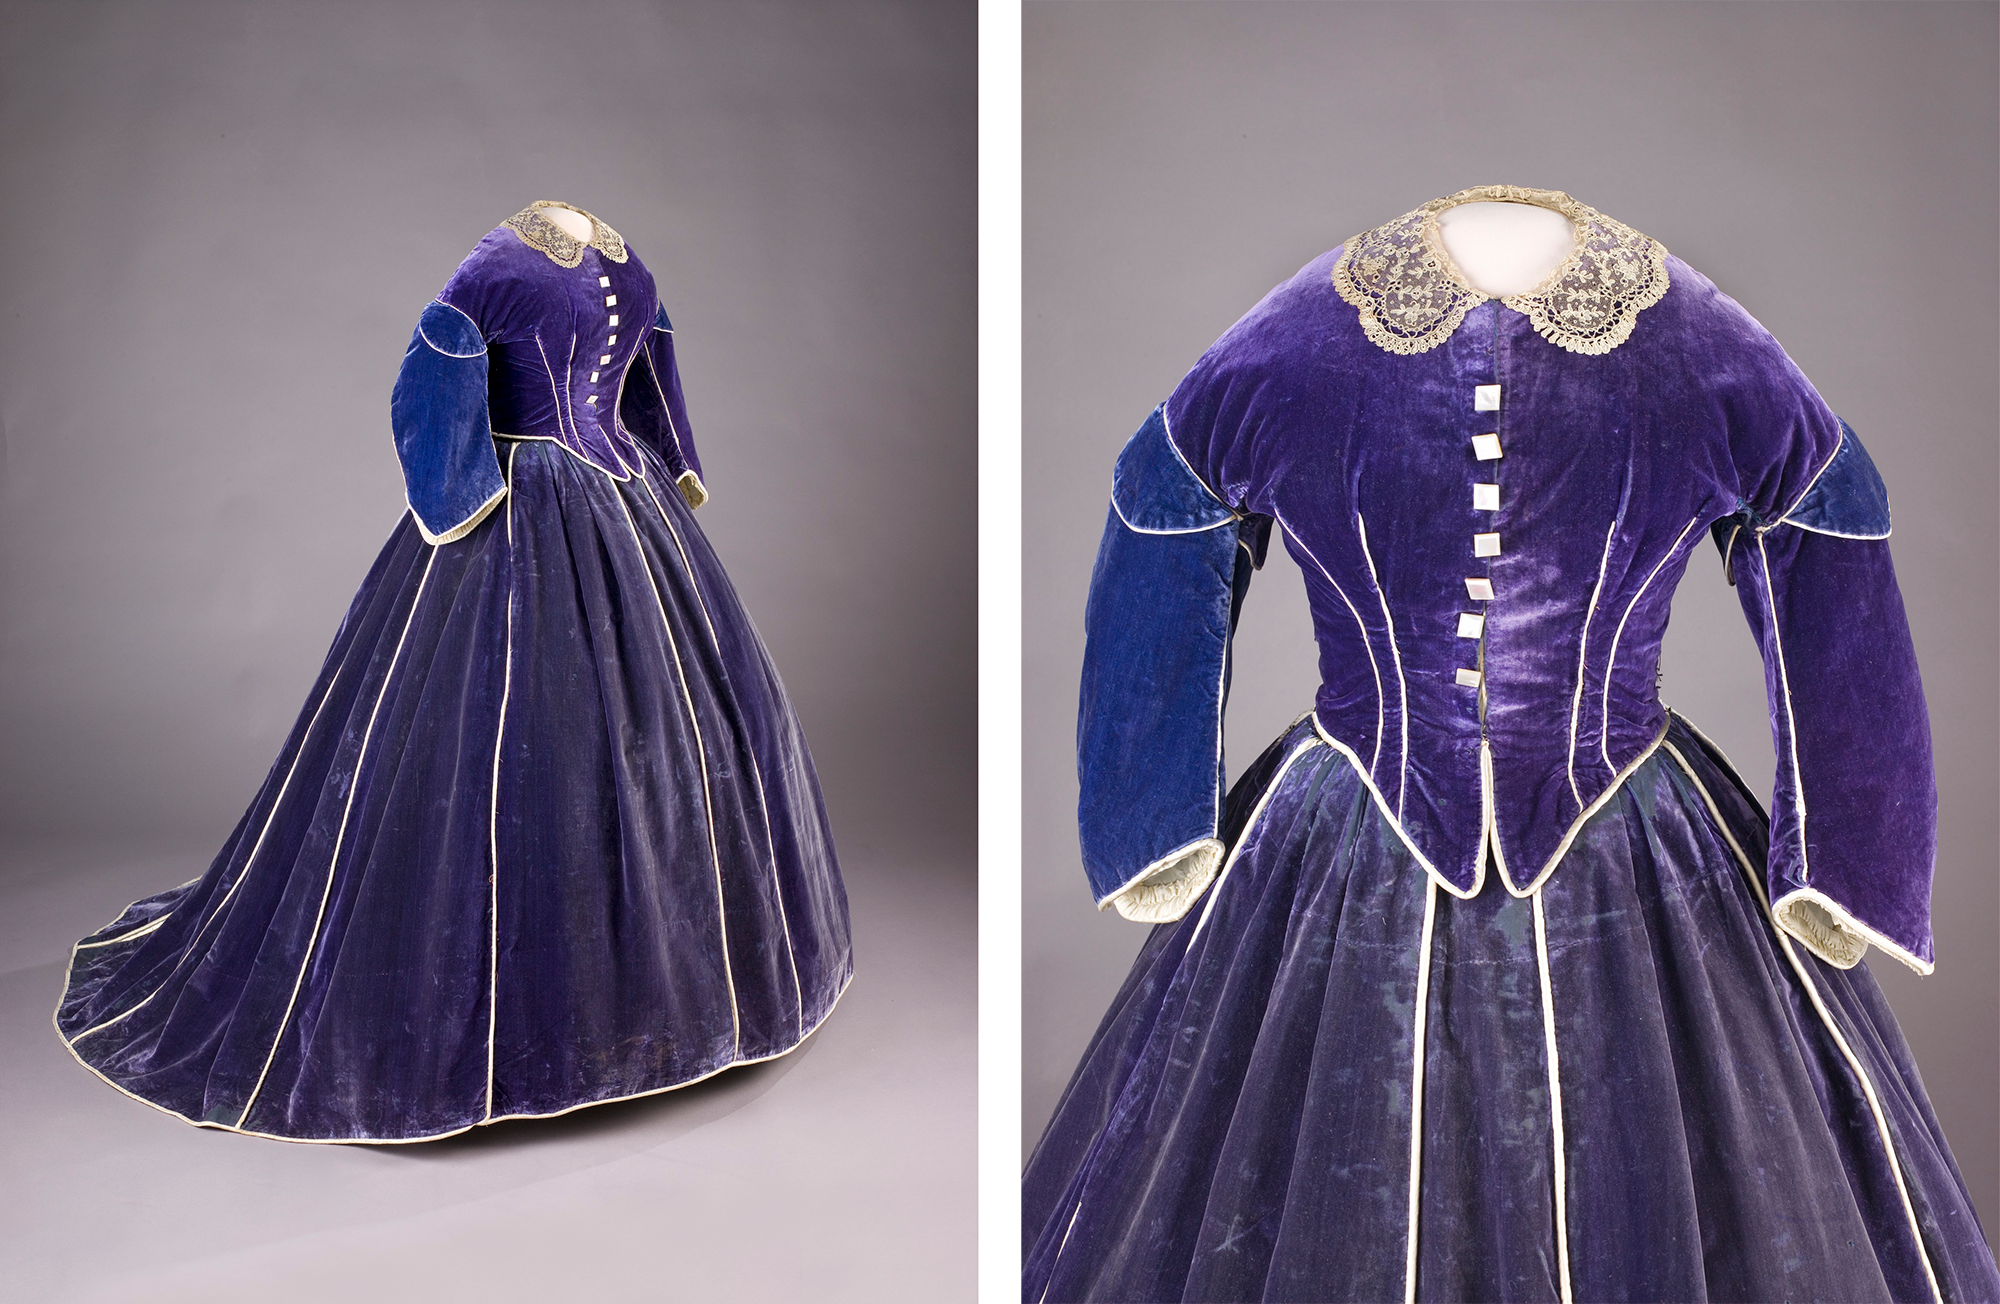 Elizabeth Keckley, Mary Lincoln dress, 1861, velvet, satin, and mother of pearl, 152.4 cm x 121.92 cm (National Museum of American History, Smithsonian Institution)